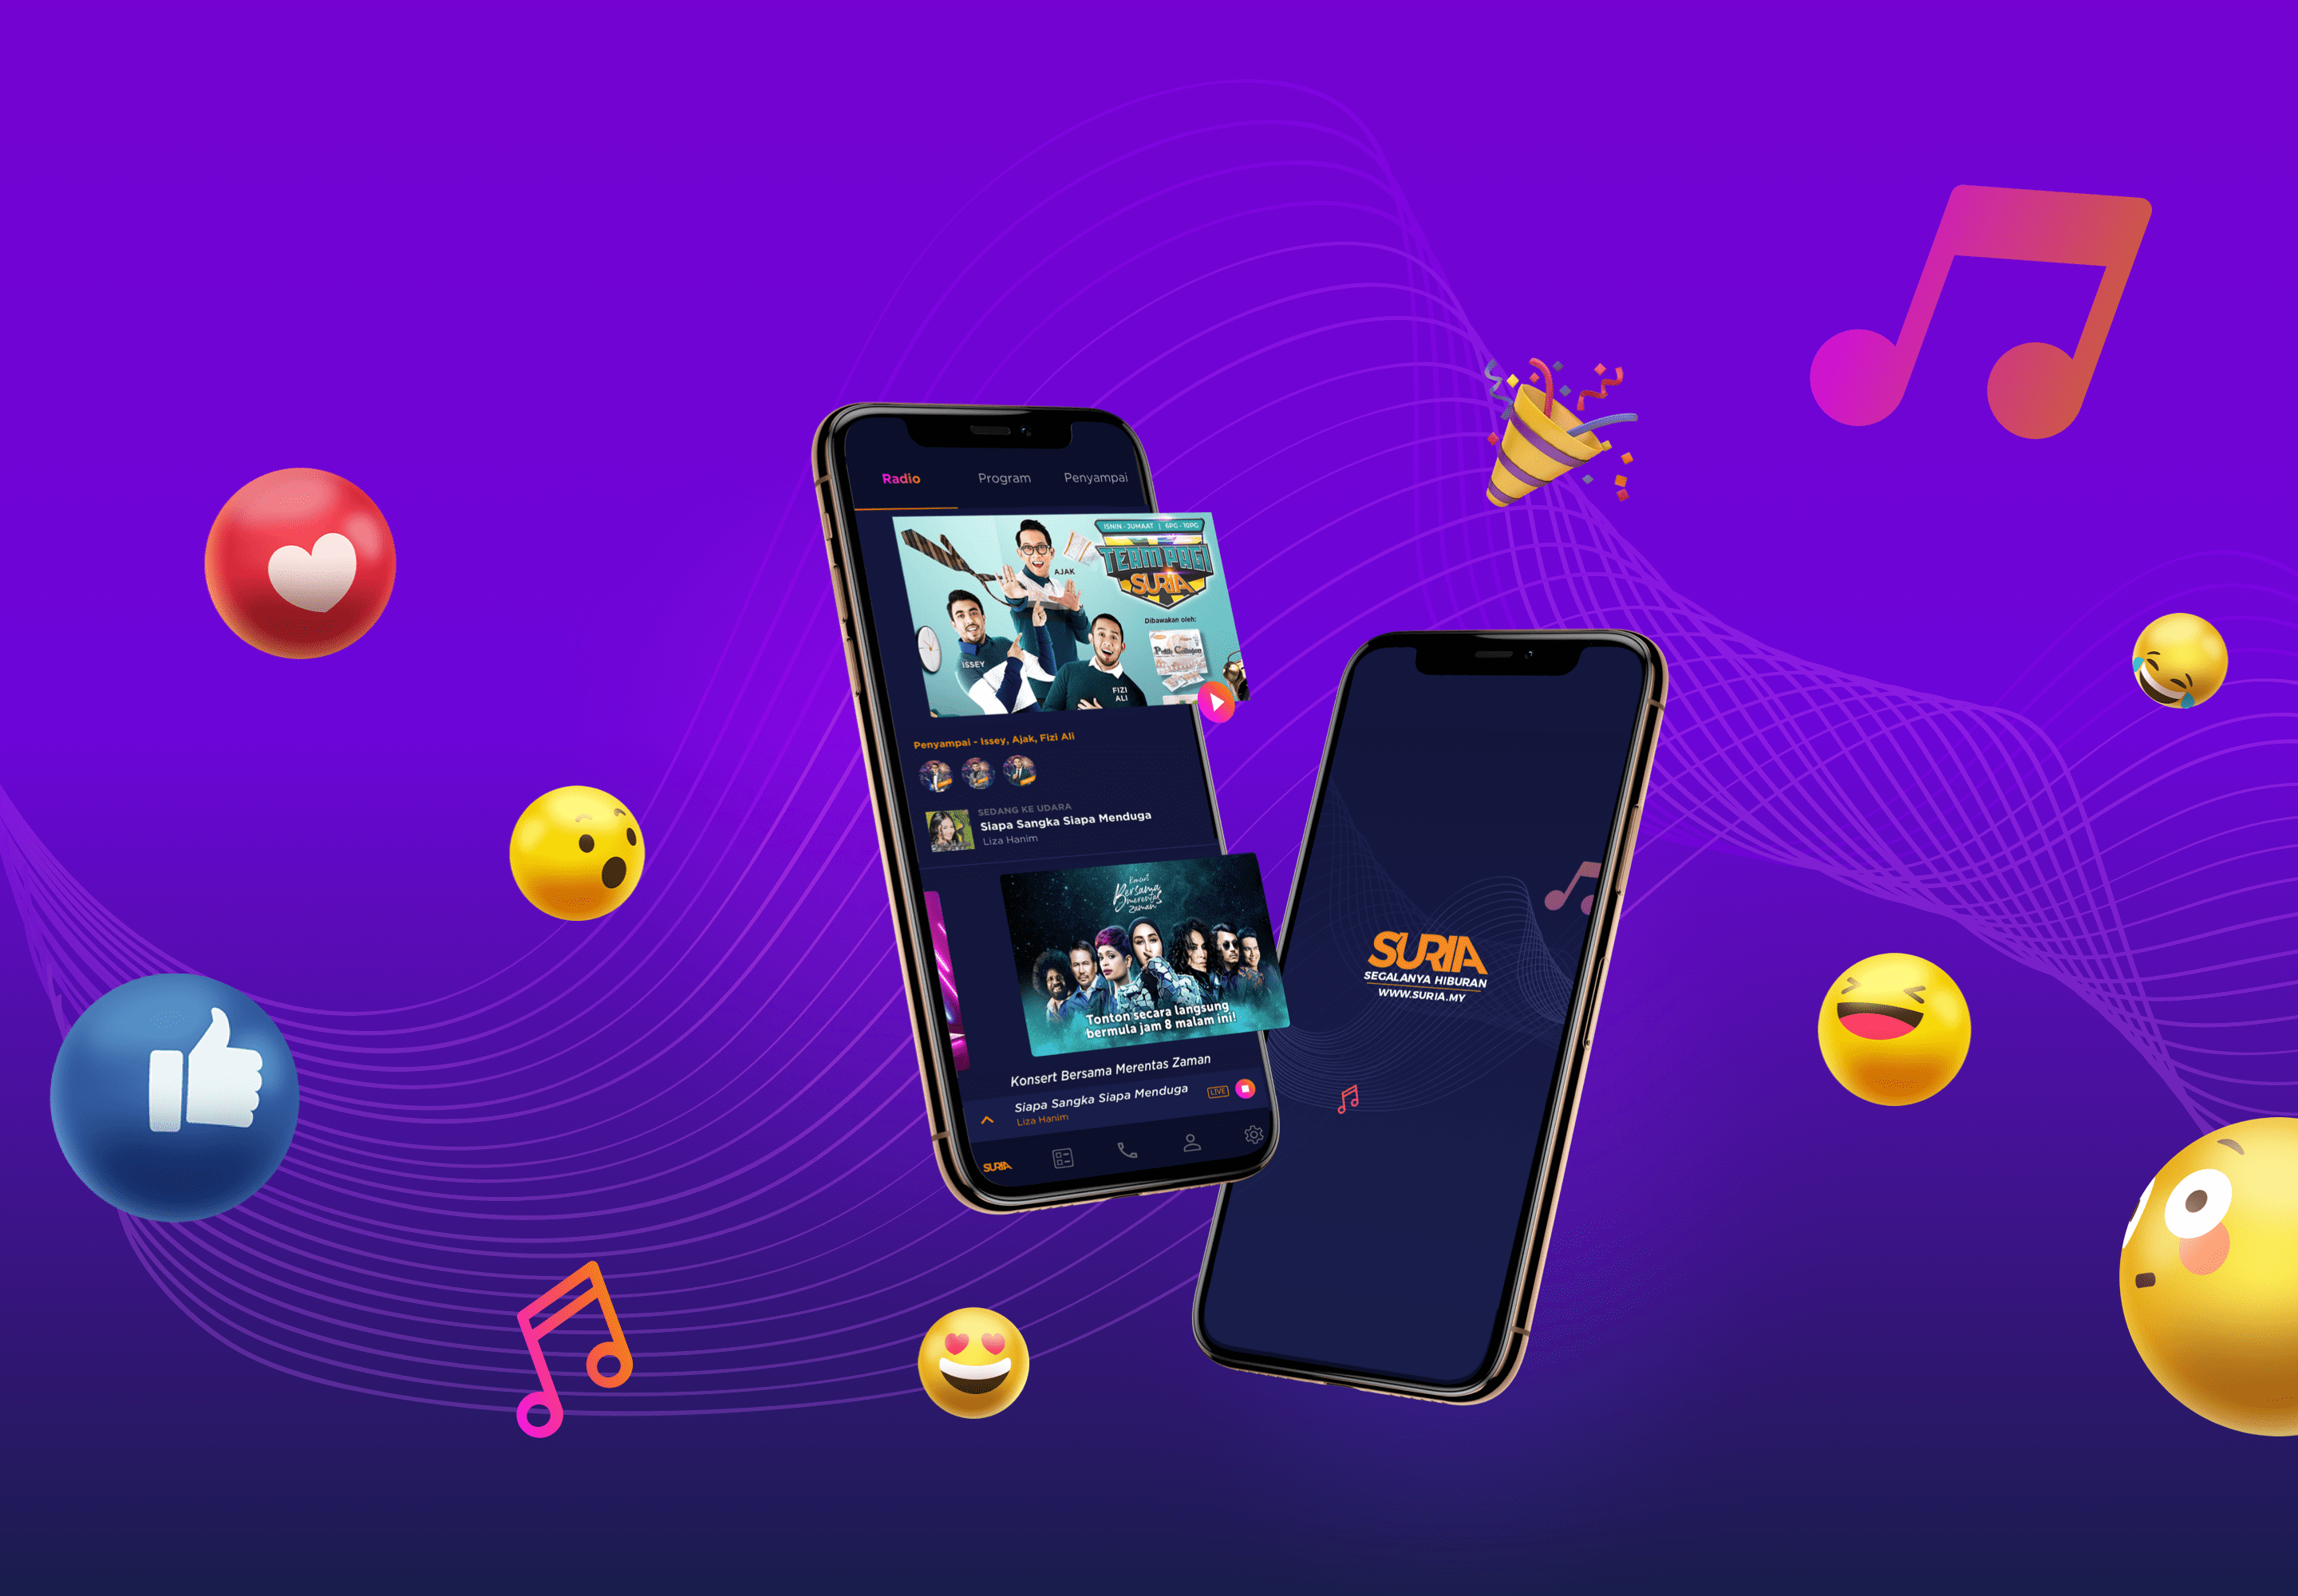 Suria FM radio apps showcasing the home page features with dark mode theme